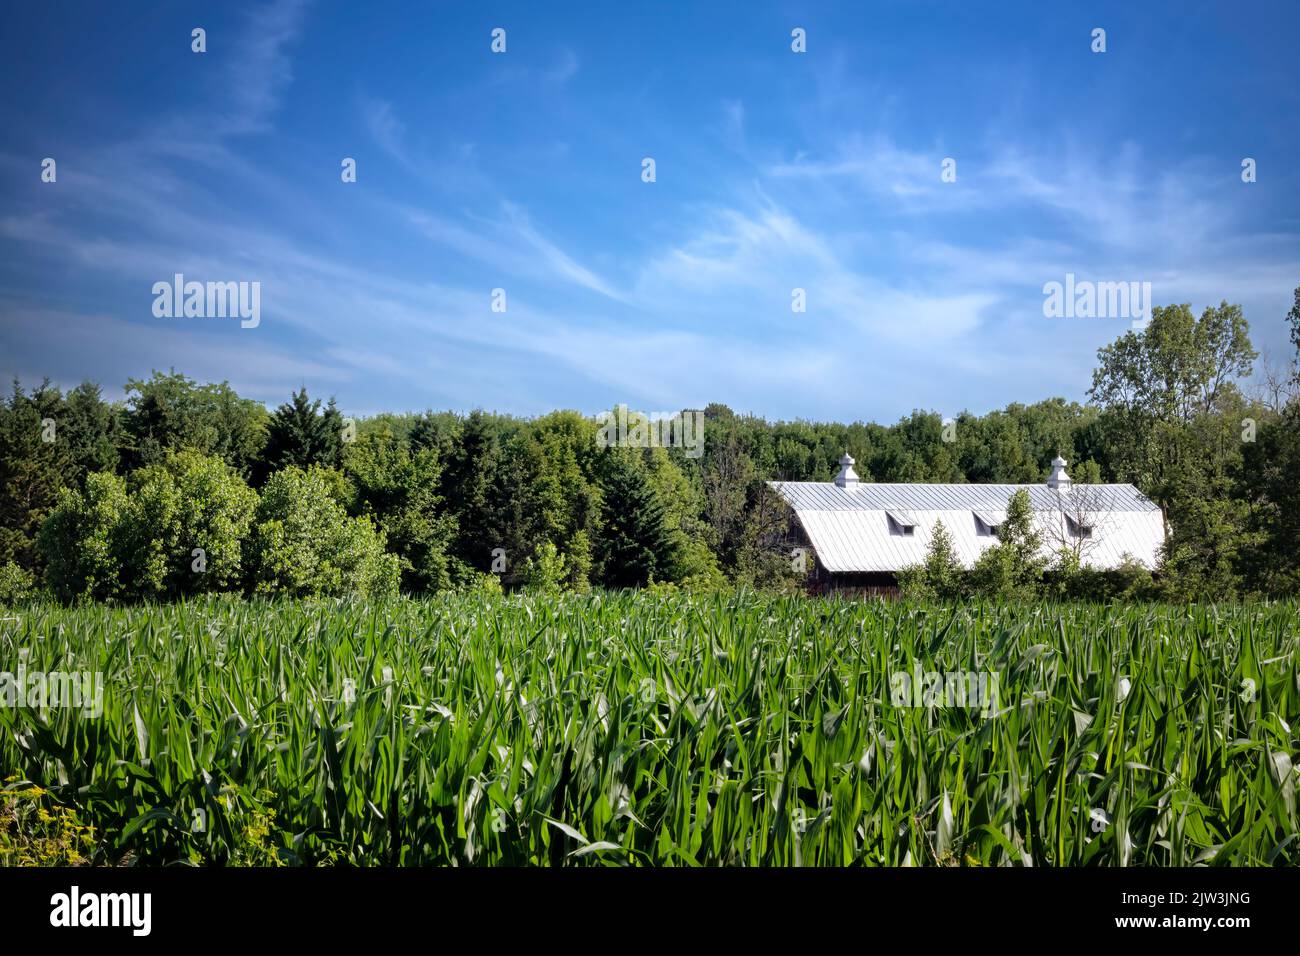 A cornfield with an old barn in the background stands at Kossuth, an area near Manitowoc, Wisconsin. Stock Photo